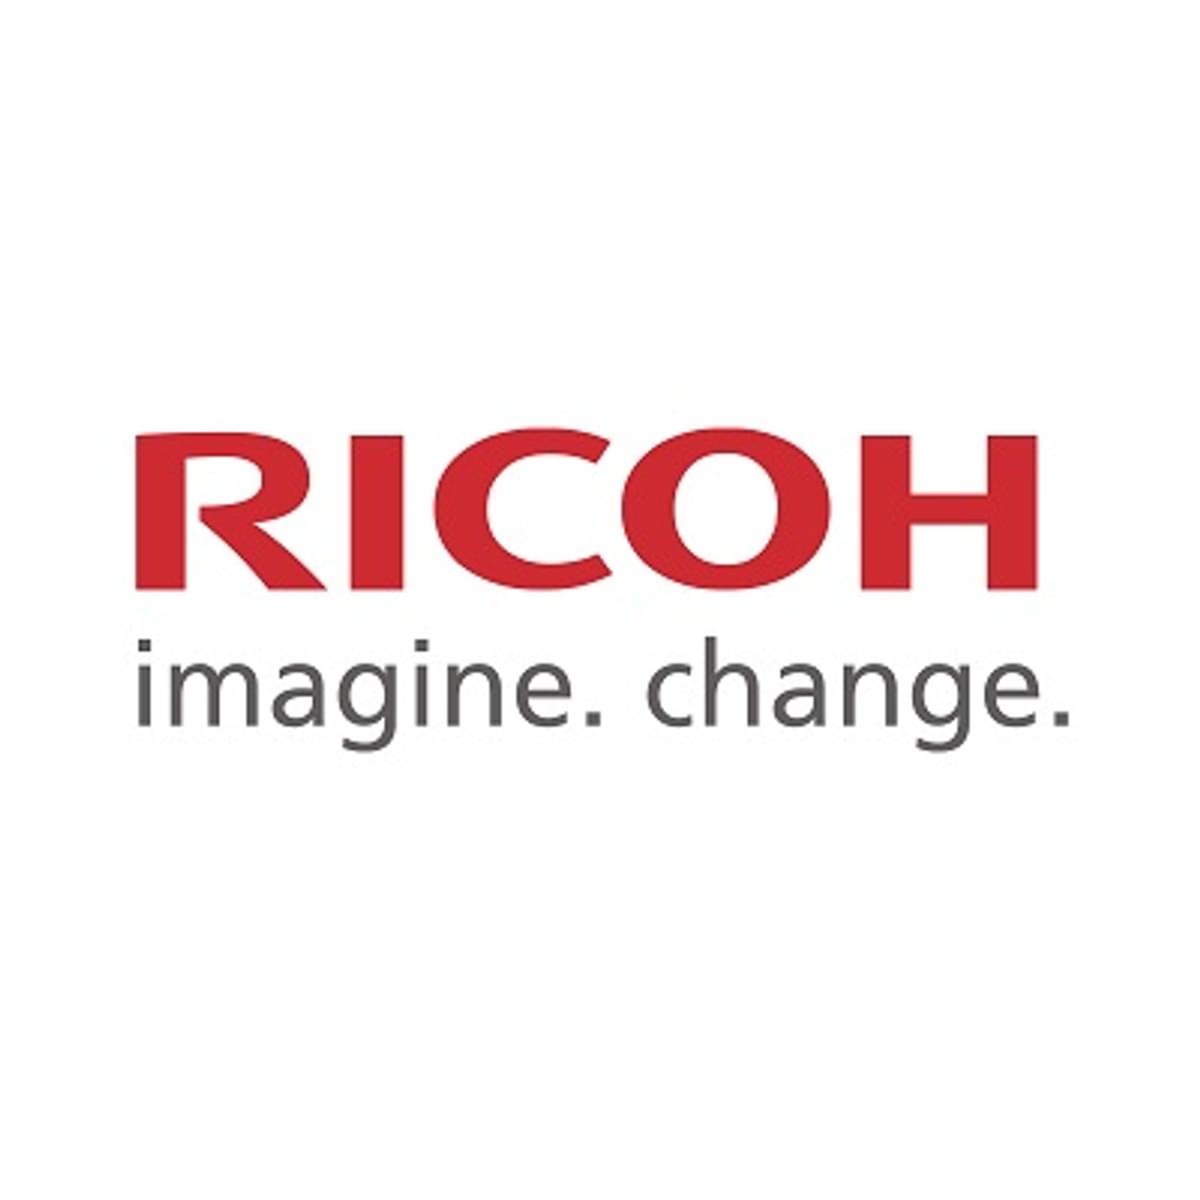 Ricoh neemt MTI Technology over image